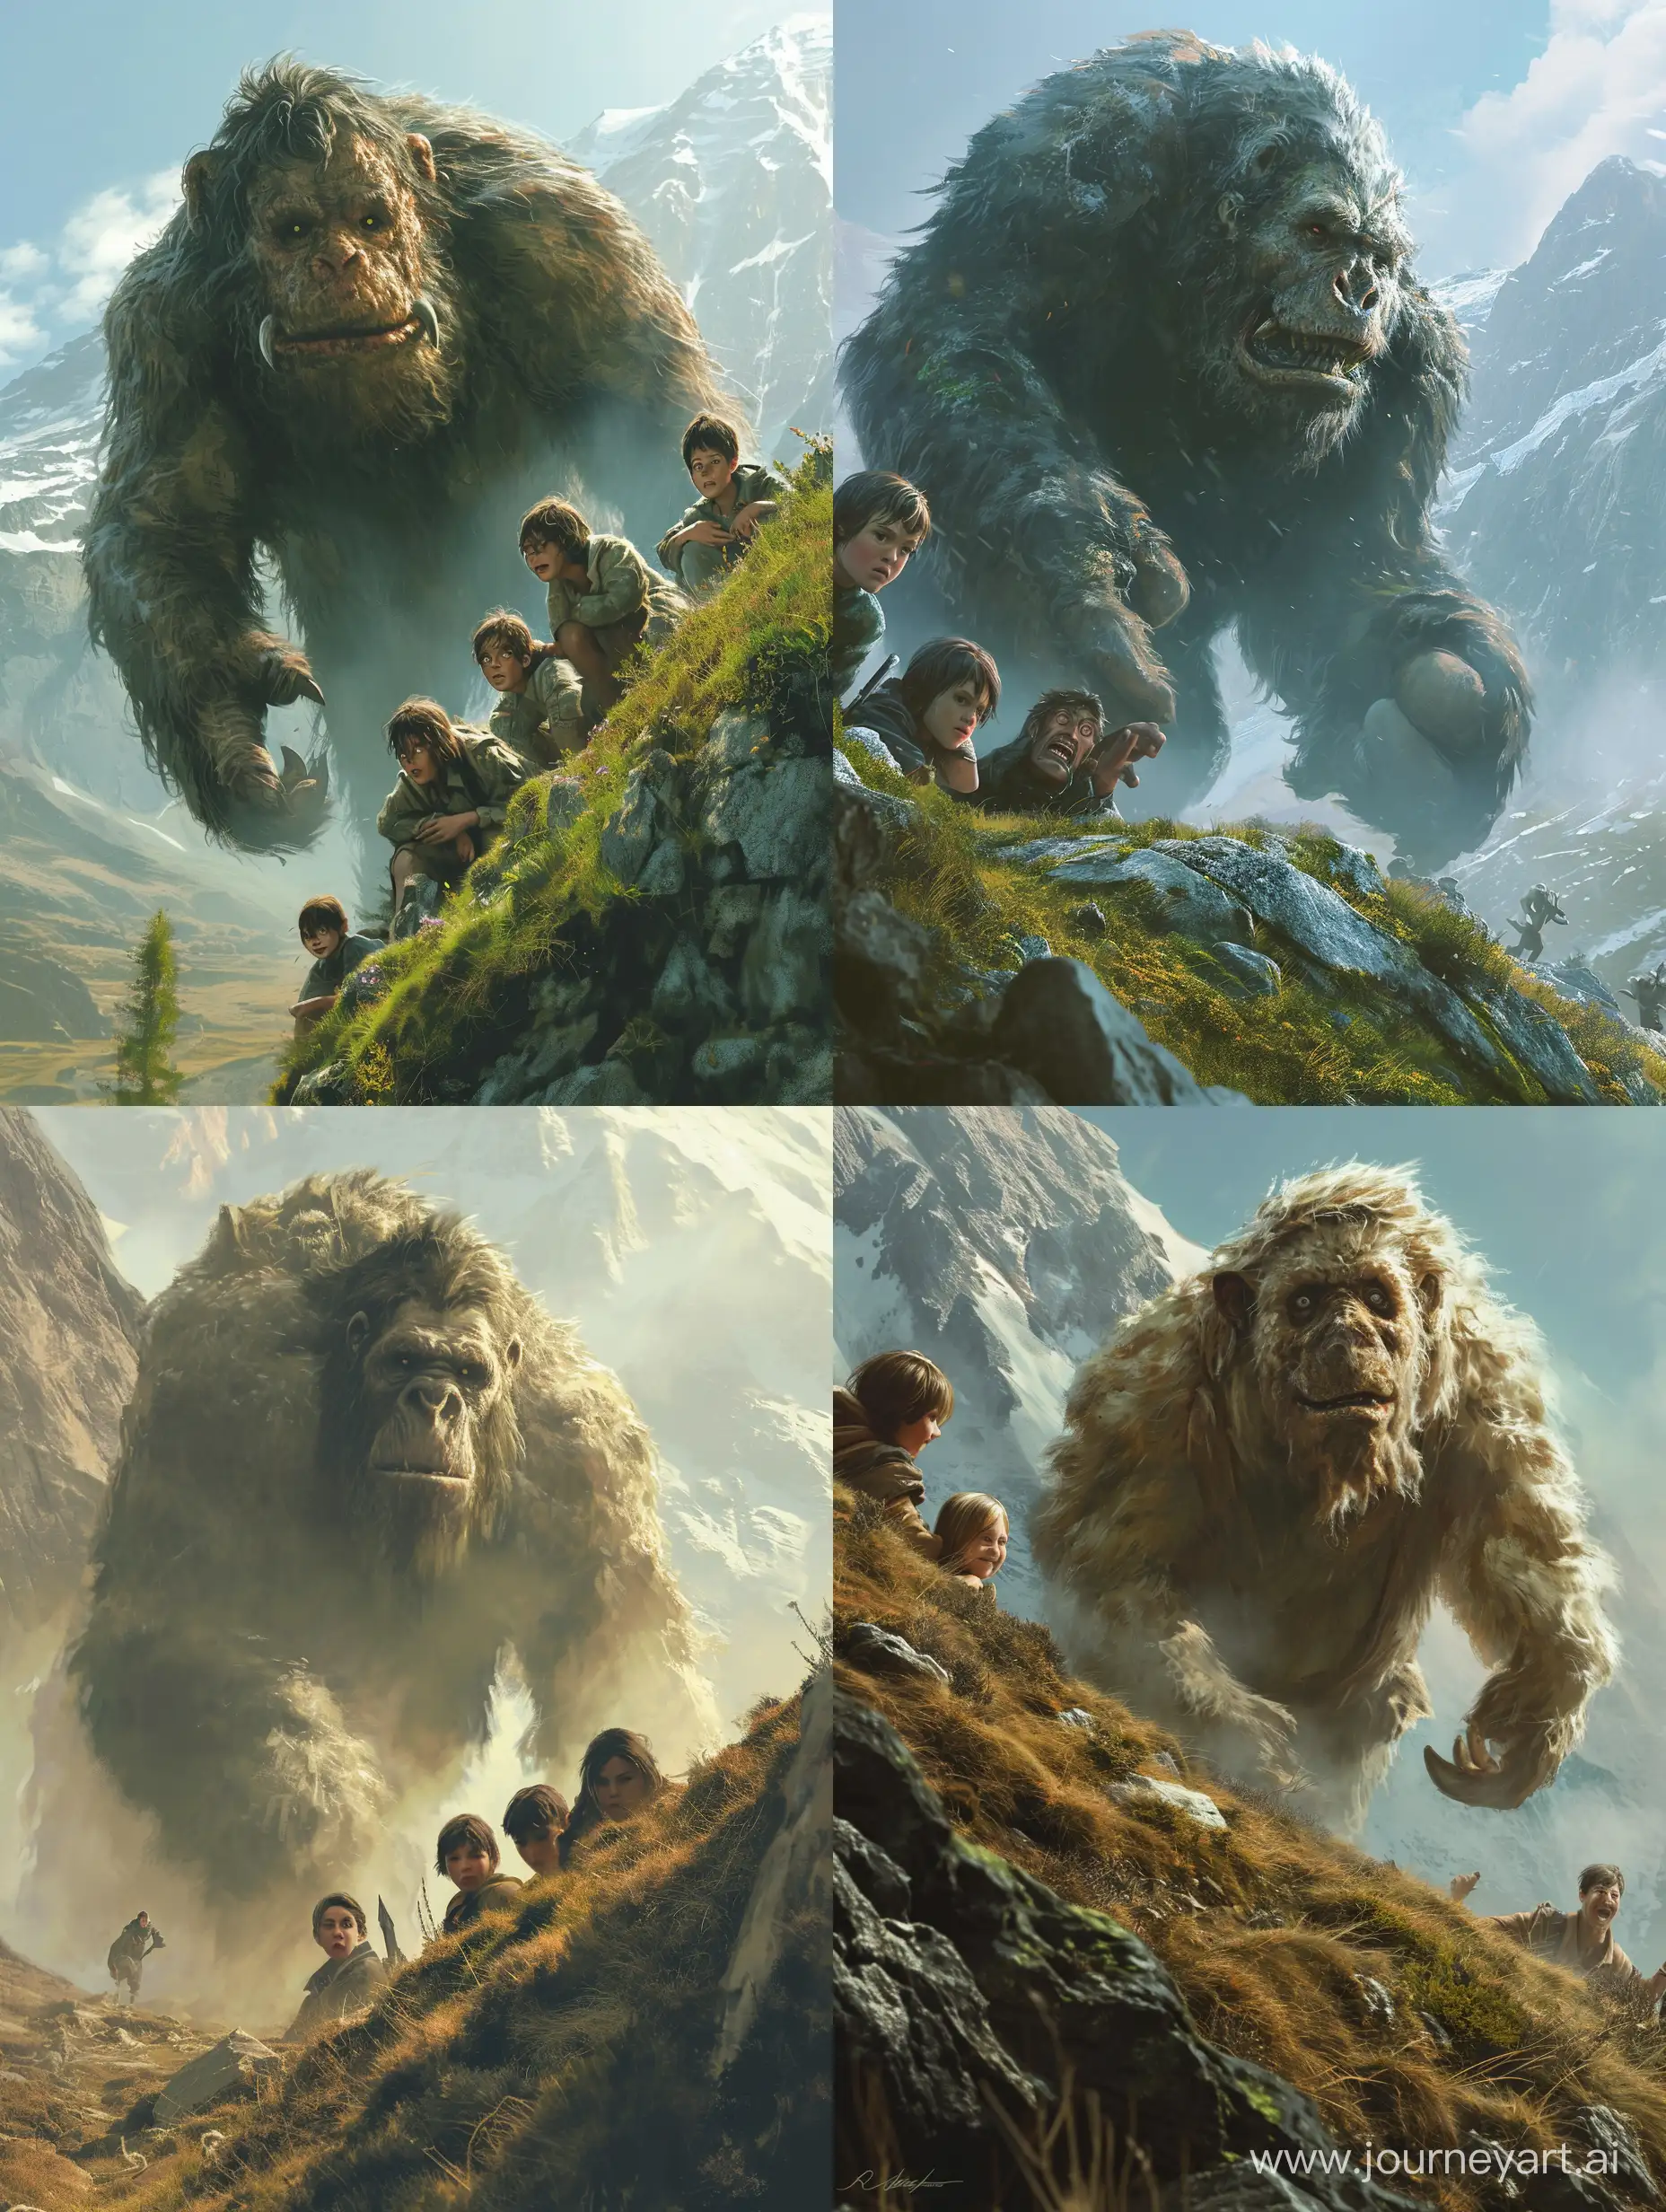 enourmous giant creature walking through the mountains. A group of young adventurers are hiding behind a hill and looking amazed at the giant –iw 0.25